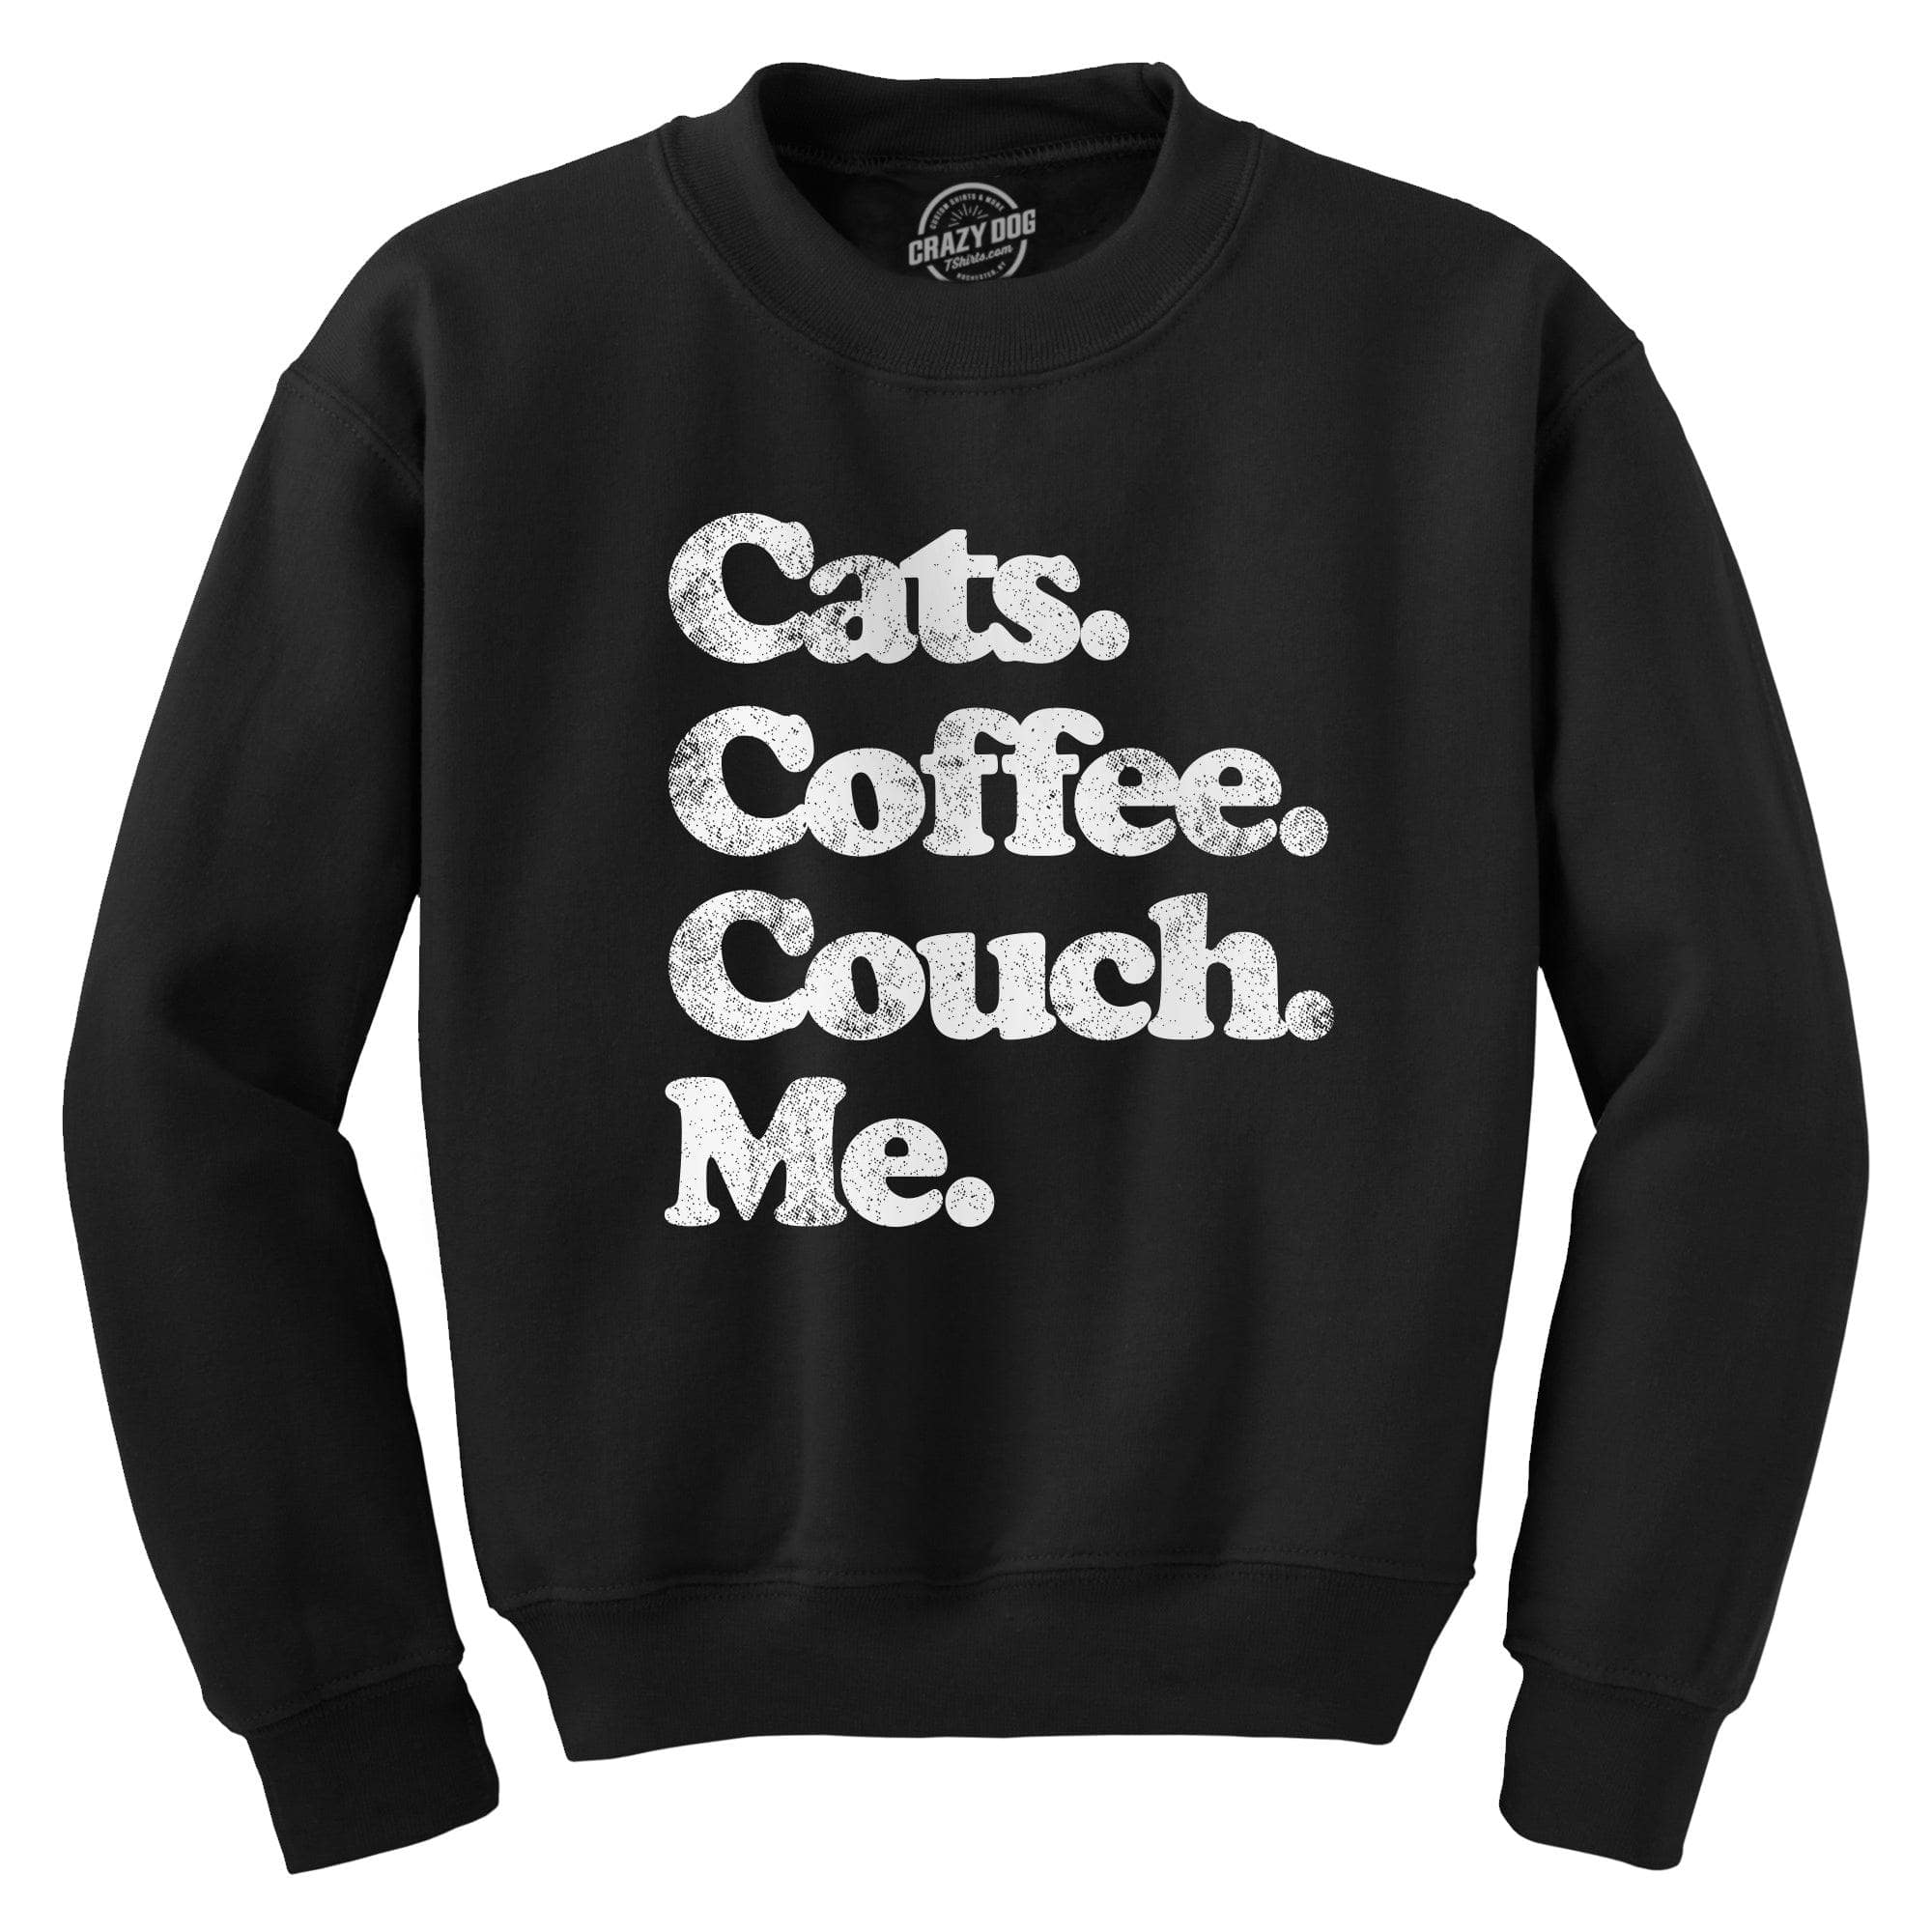 Cats Coffee Couch Me Crew Neck Sweatshirt  -  Crazy Dog T-Shirts